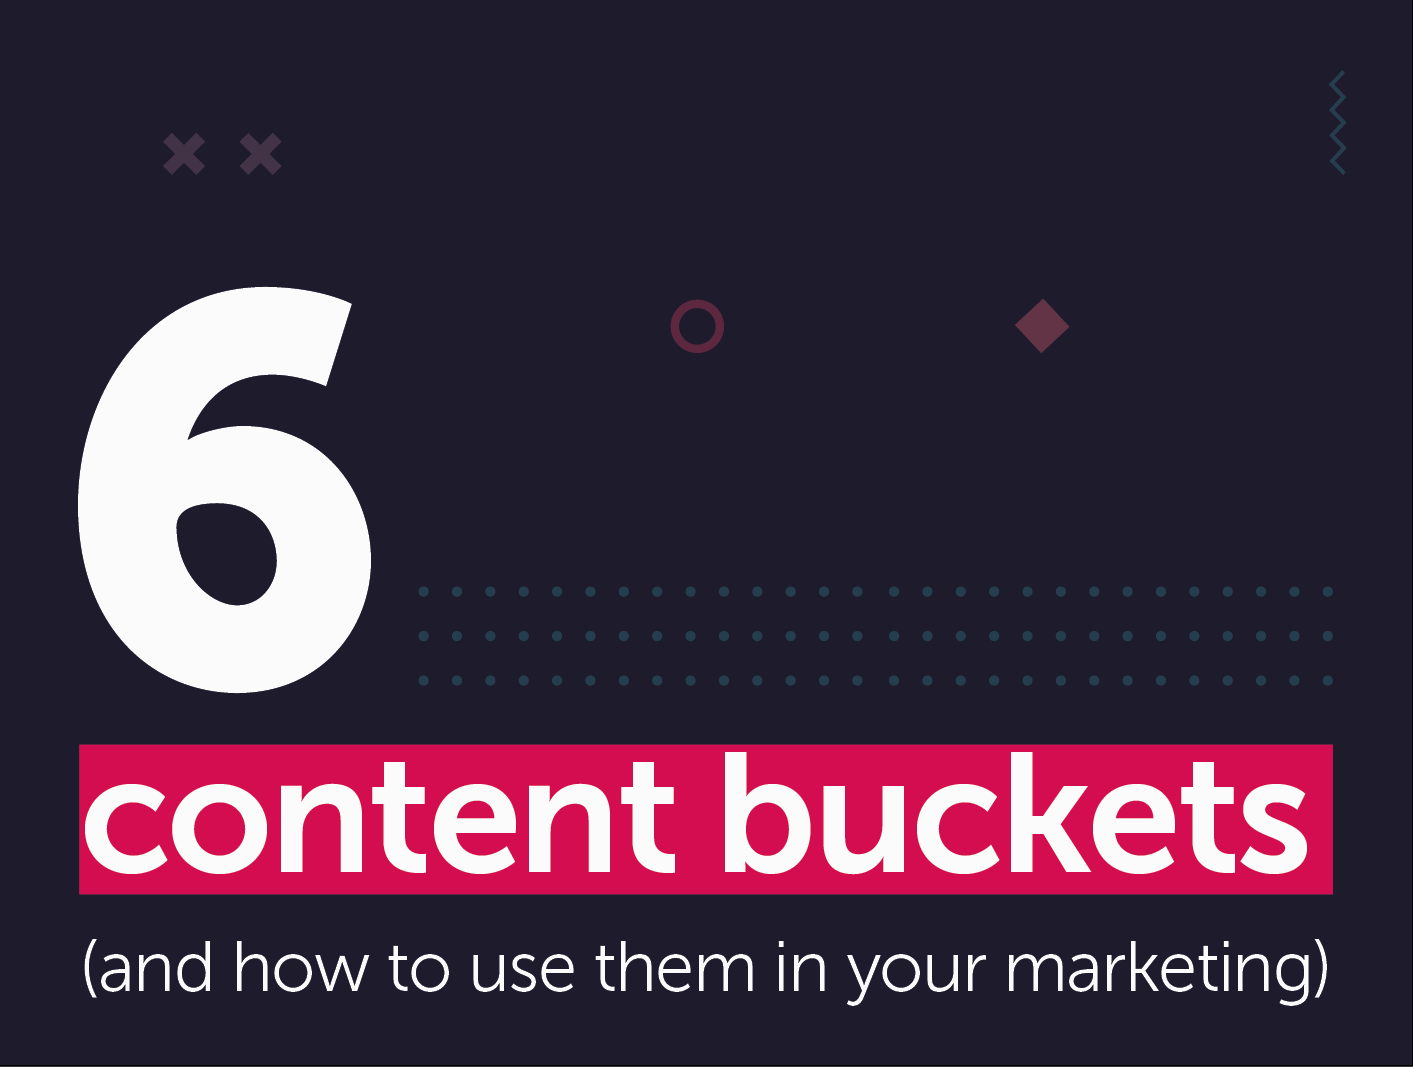 6 content buckets (and how to use them in your marketing)